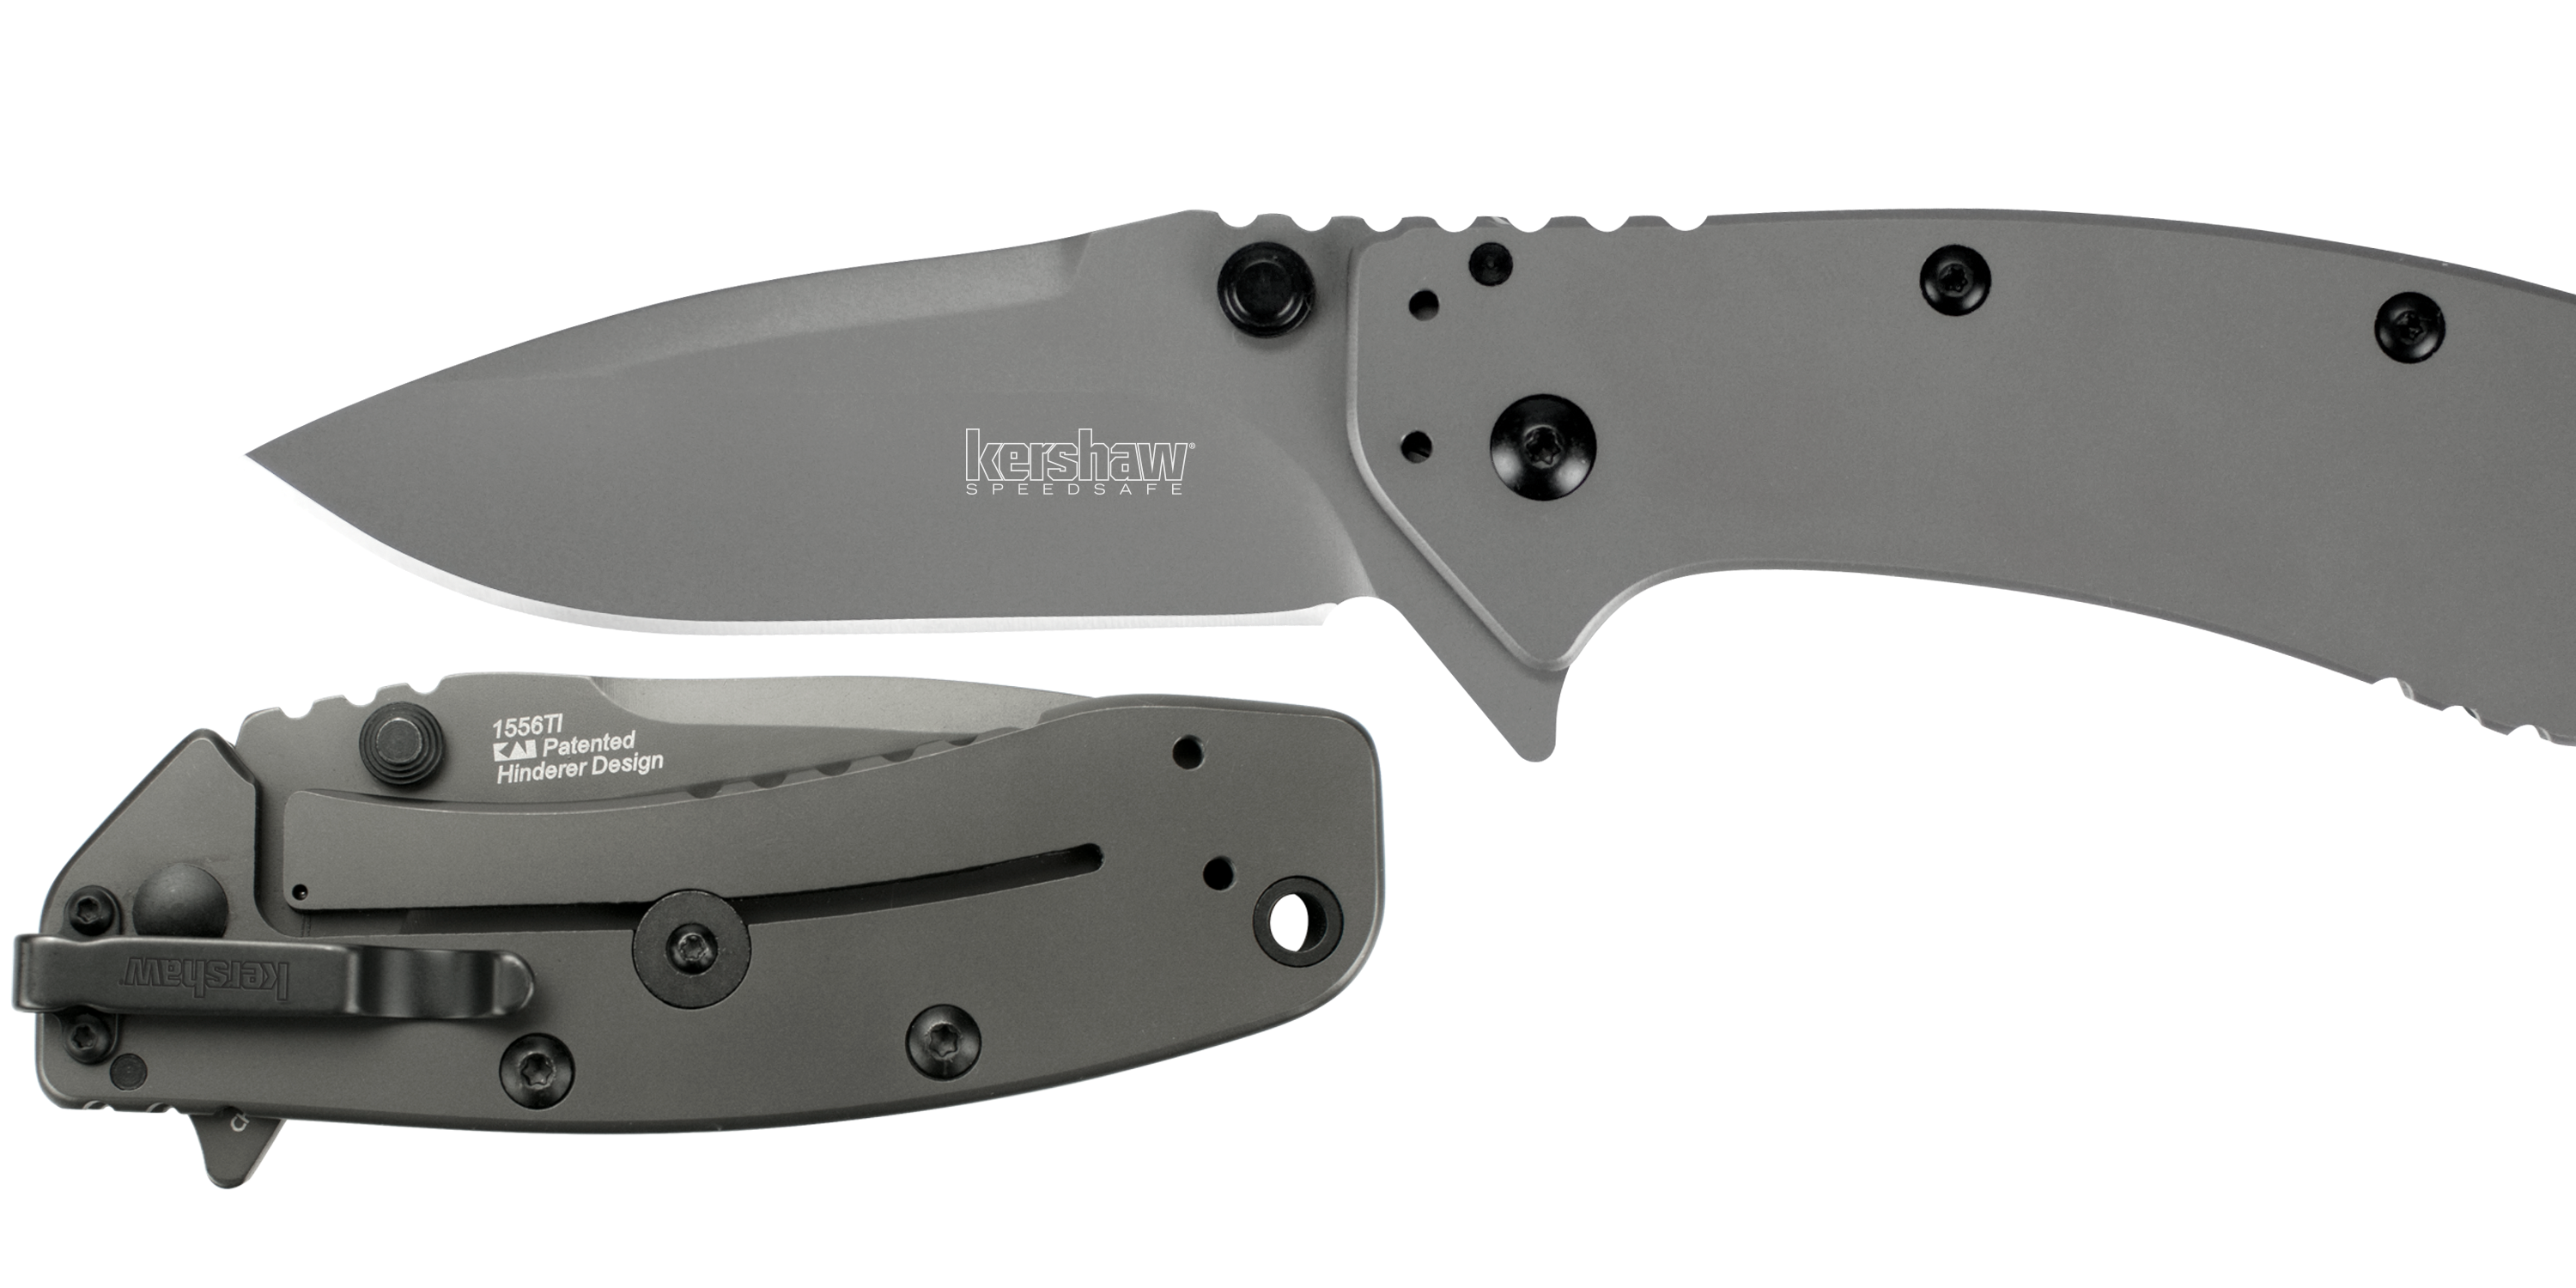 https://9to5toys.com/wp-content/uploads/sites/5/2017/06/kershaw-knife.png